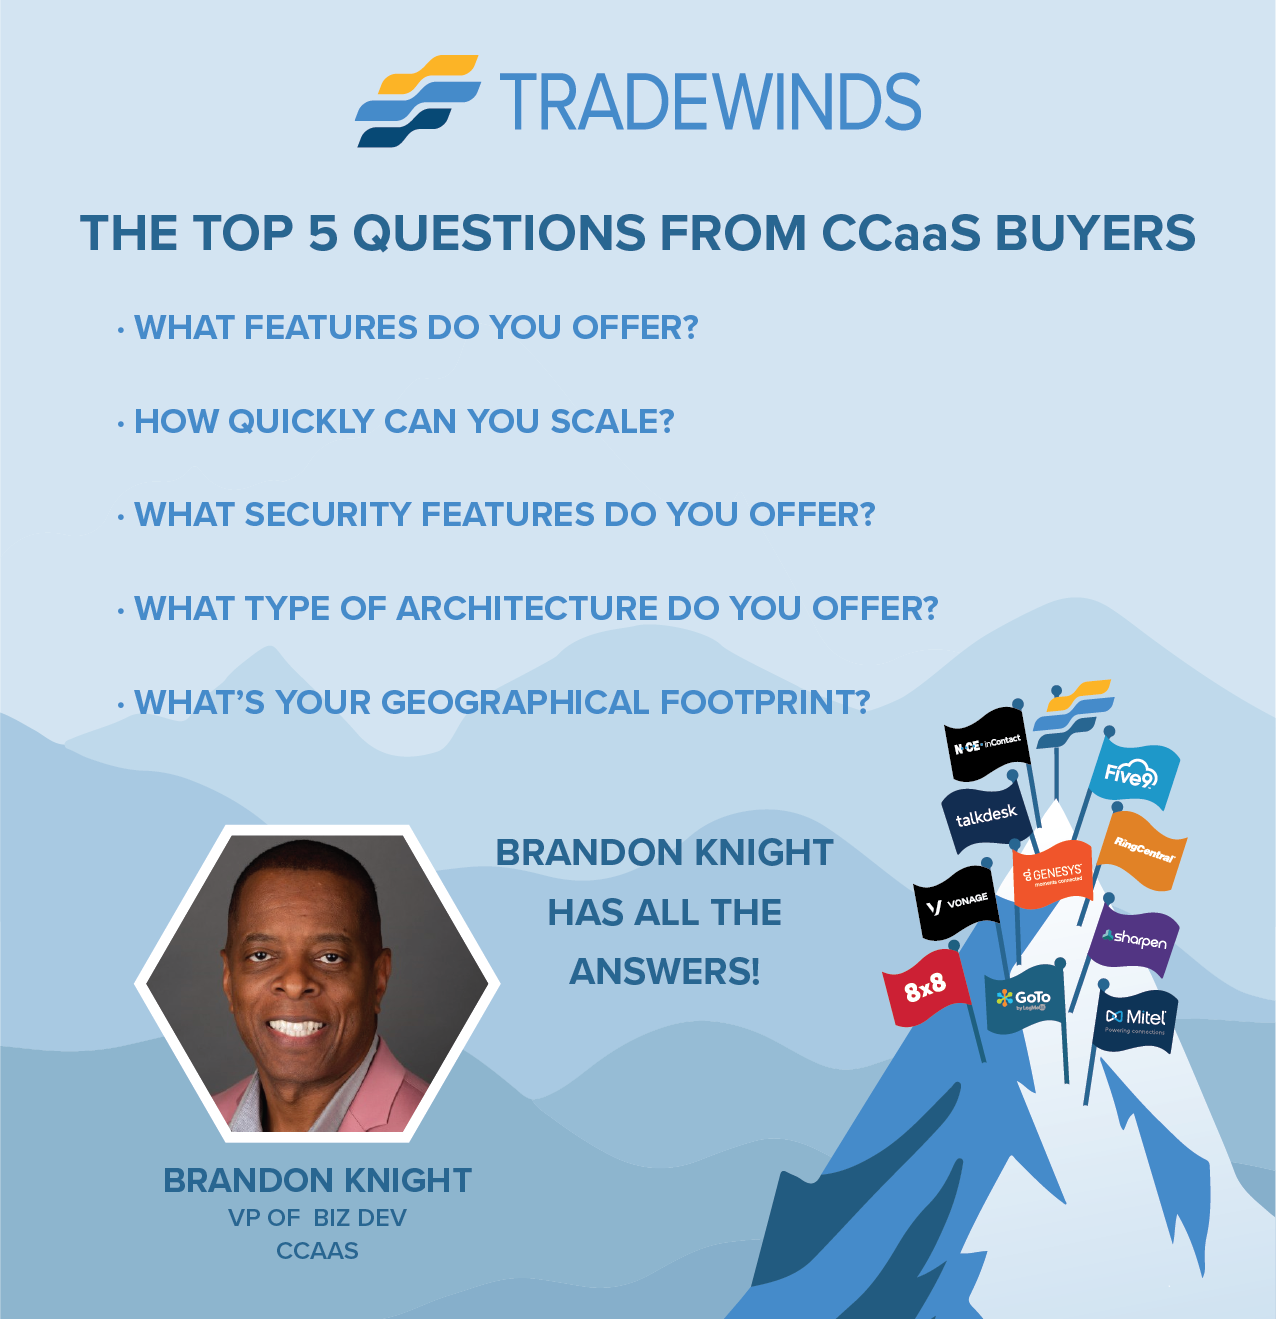 The Top 5 Questions from CCaaS Buyers